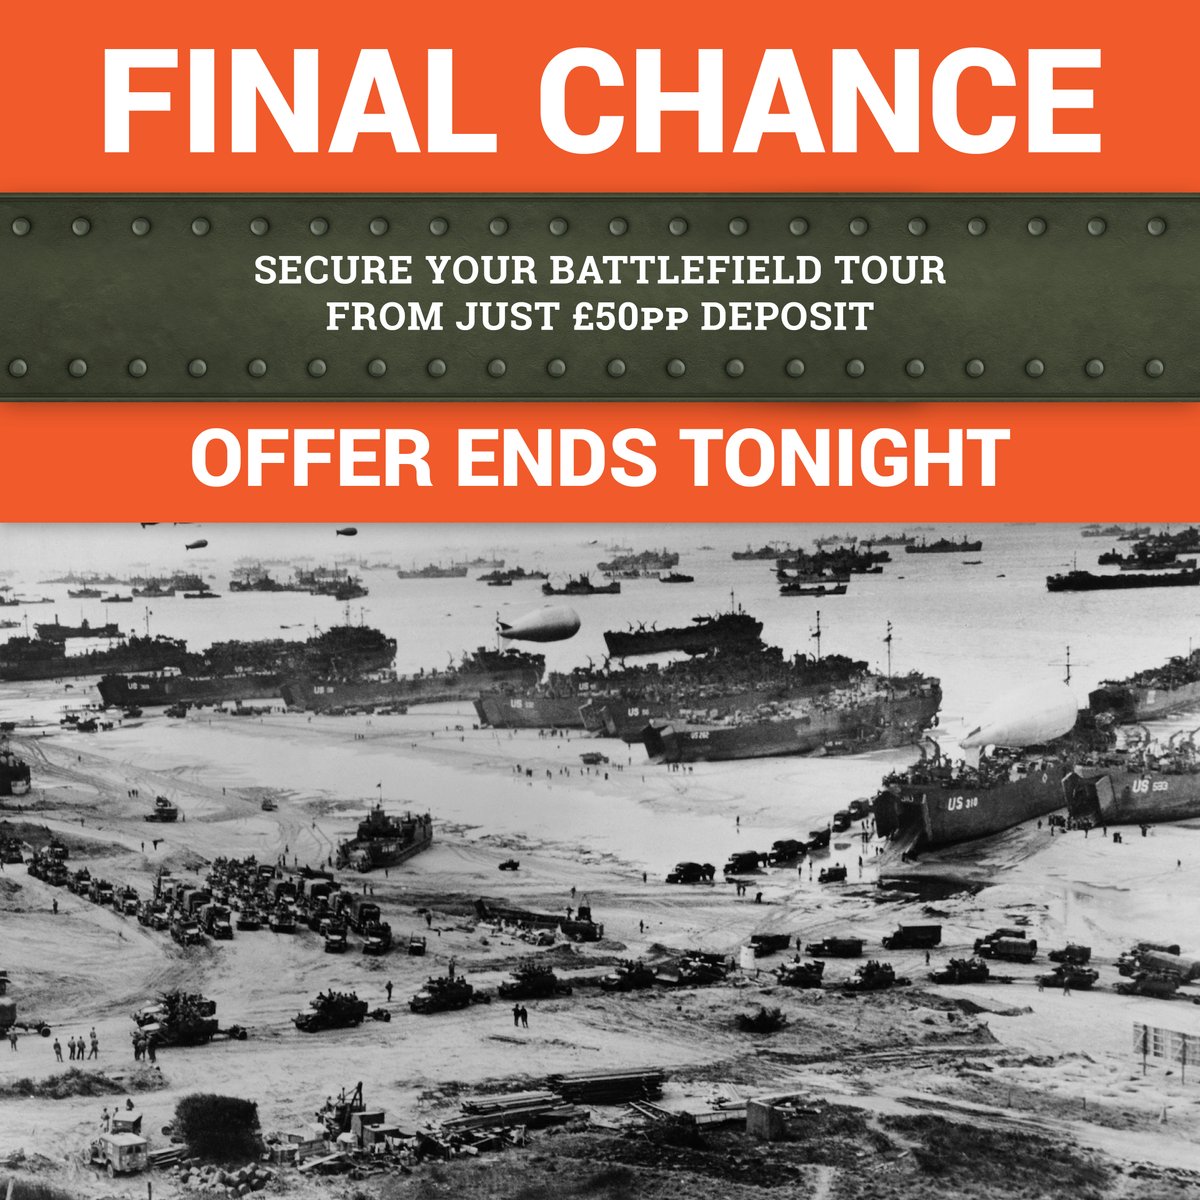 With our low deposit offer ending tonight, this is your final chance to book your battlefield tour from only £50pp. Don’t delay – browse our full collection covering WW1, WW2 and a range of other military campaigns >> ow.ly/aT8V50QIPn2